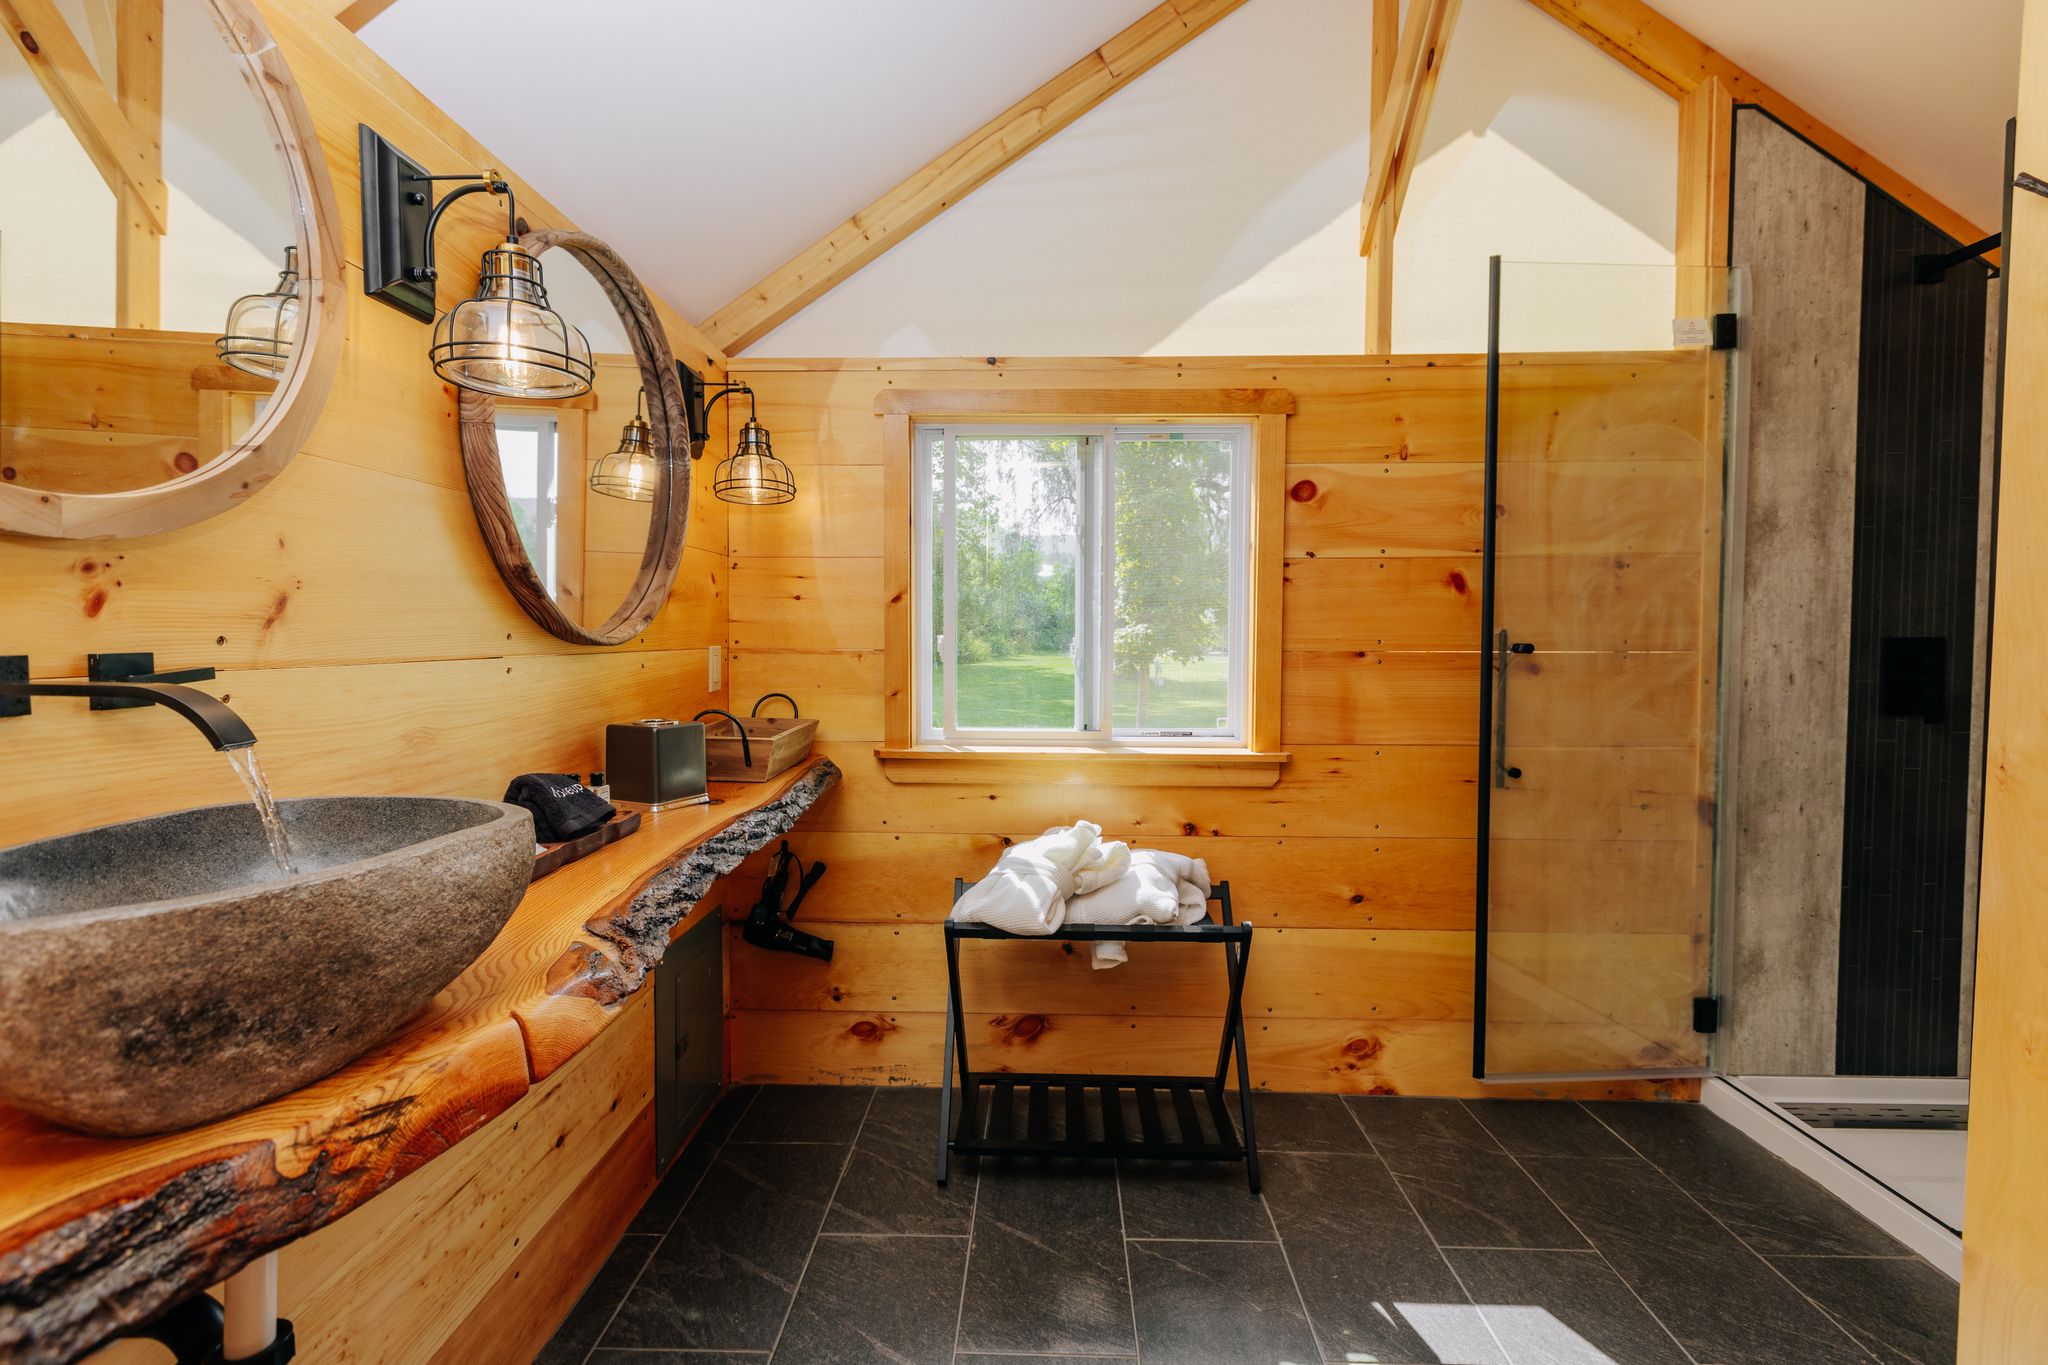 Glamping Goes Luxe: The Preserve Battenkill River Offers Unforgettable Escape into Nature